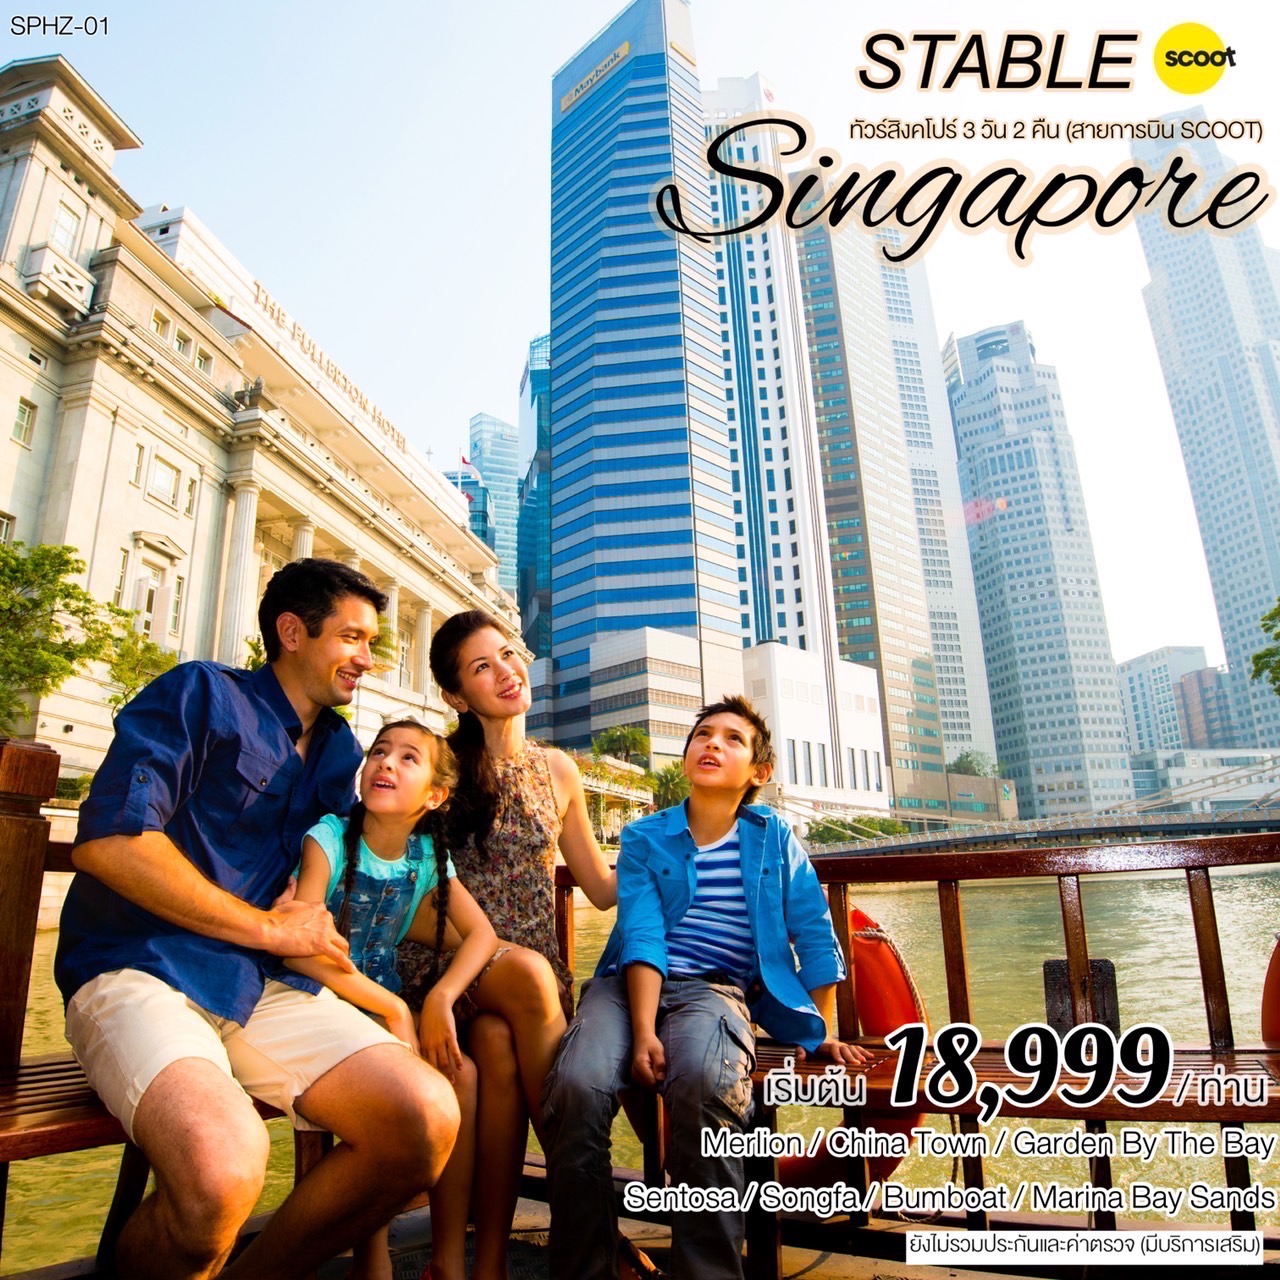 💥SPHZ-01.STABLE SINGAPORE 3D2N (TR) รูปที่ 1